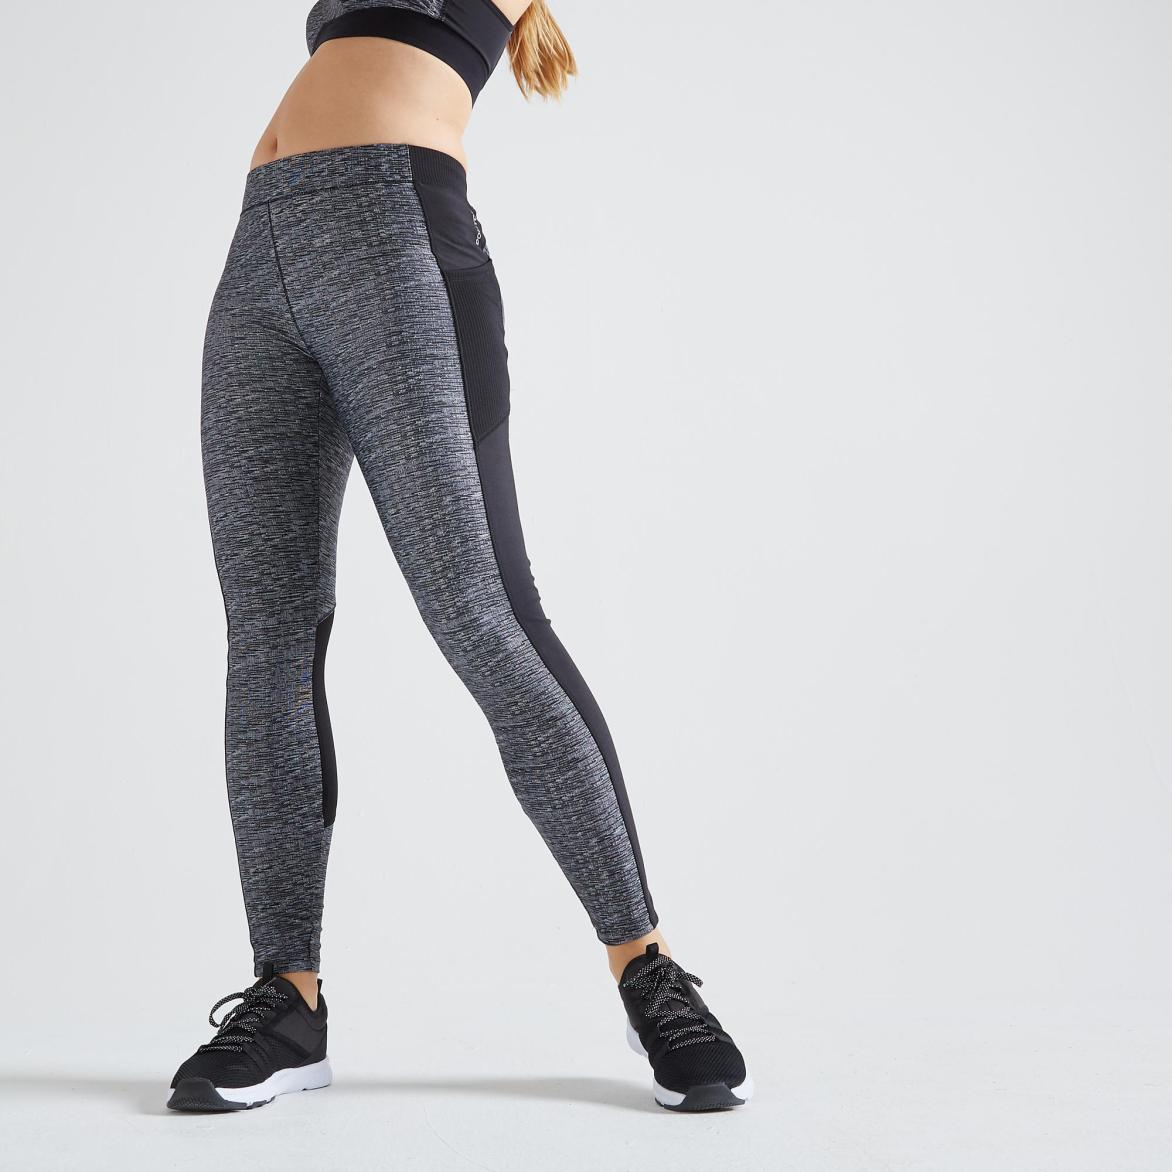 Leggings Fitness Sustainable Ethical Activewear